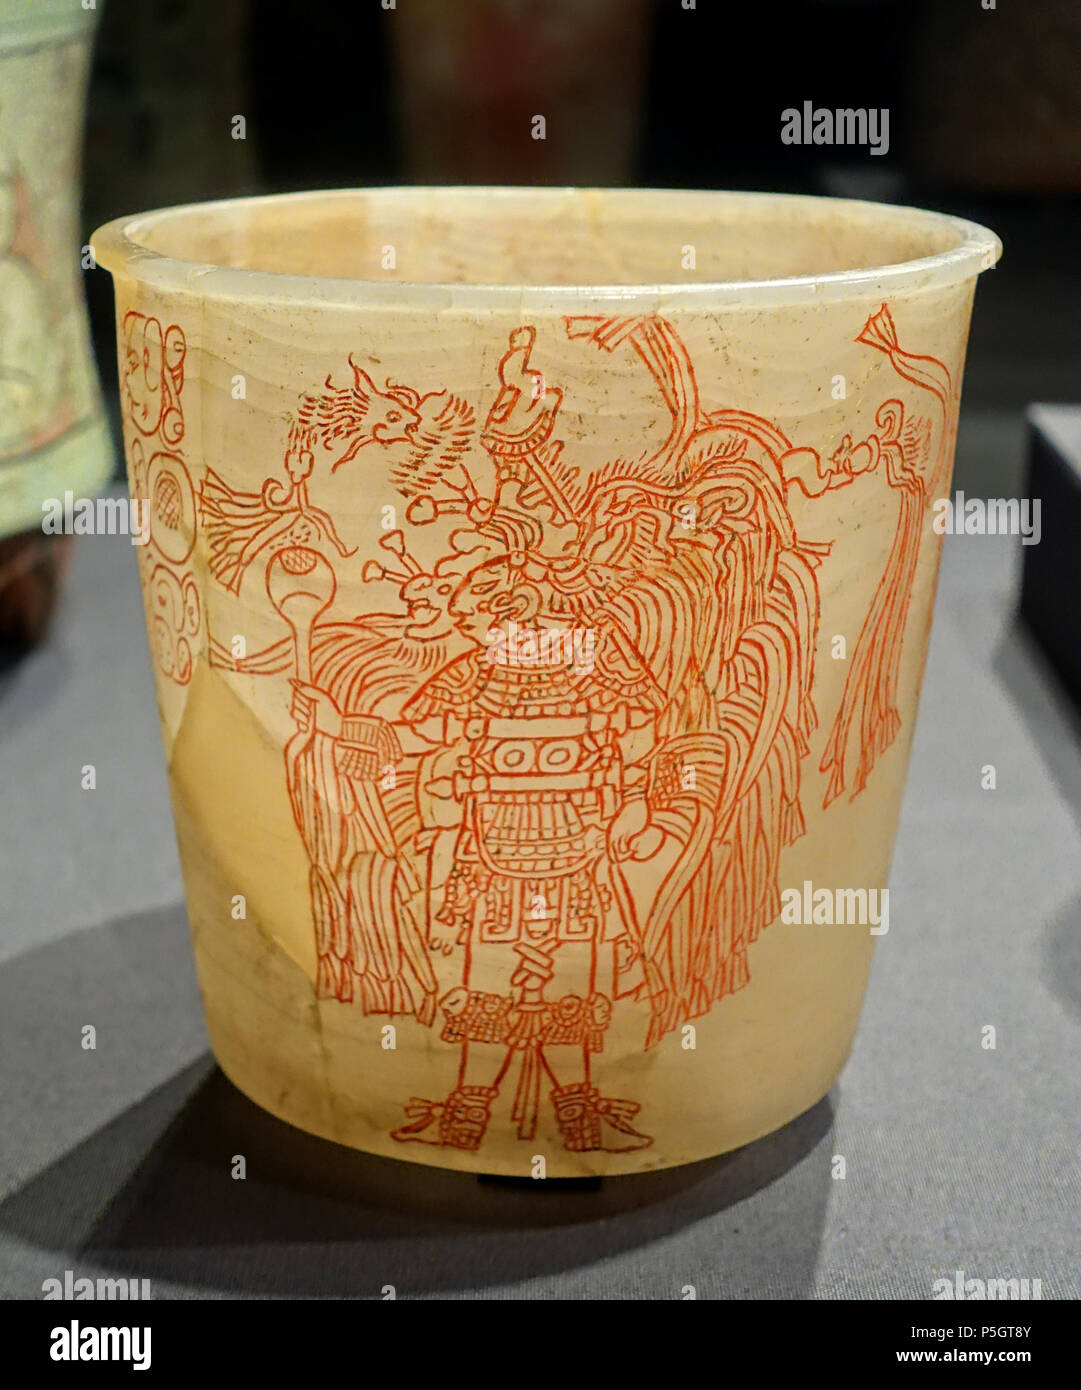 N/A. English: Exhibit in the Princeton University Art Museum - Princeton University, Princeton, New Jersey, USA. 1 December 2016, 17:22:39. Daderot 480 Drinking cup with two men in ceremonial dance costumes, Maya, Copan, Honduras, 763-820 AD, travertine - Princeton University Art Museum - DSC07157 Stock Photo